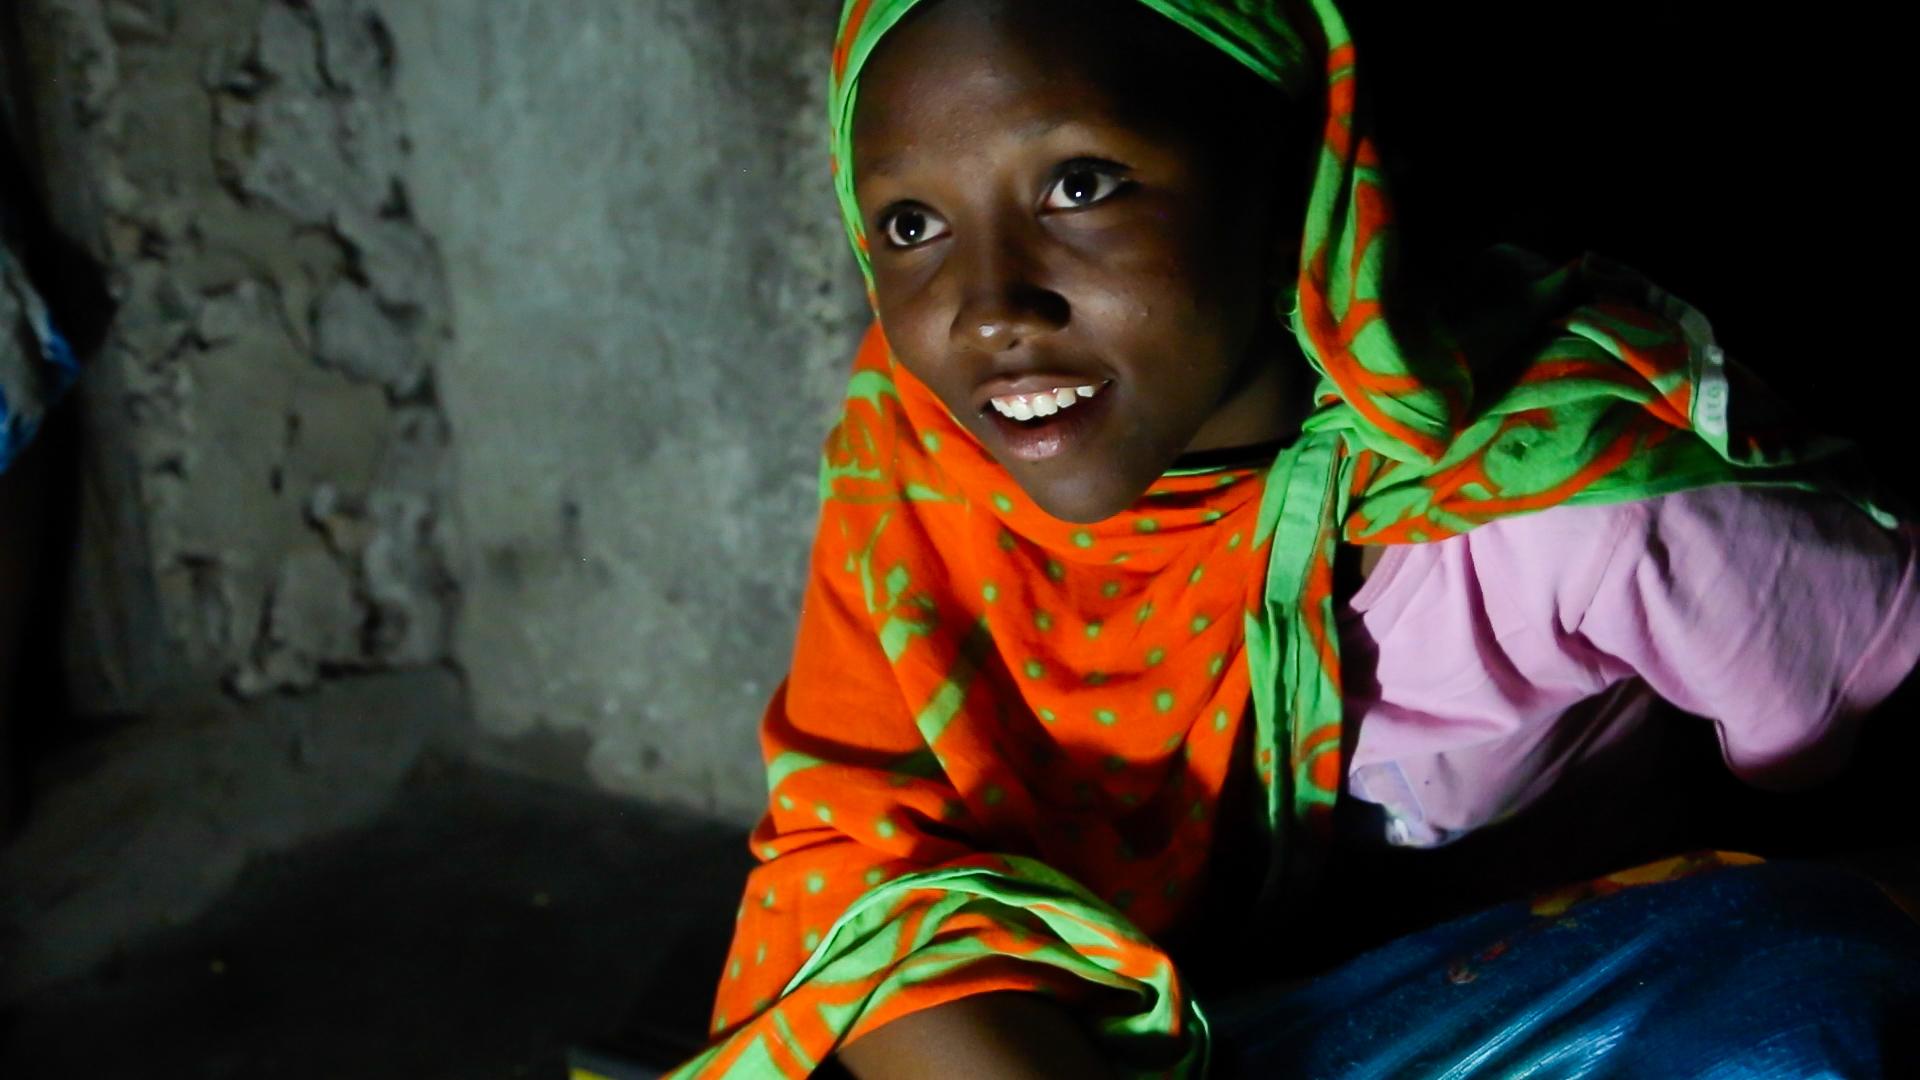 Fourteen year-old Nuru Sheha studies at night in the light of solar-powered LED lights at home in the village of Matemwe, on the Tanzanian island of Zanzibar. He family's first electrical system was installed by one of Zanzibar's 13 "solar mamas," illiter